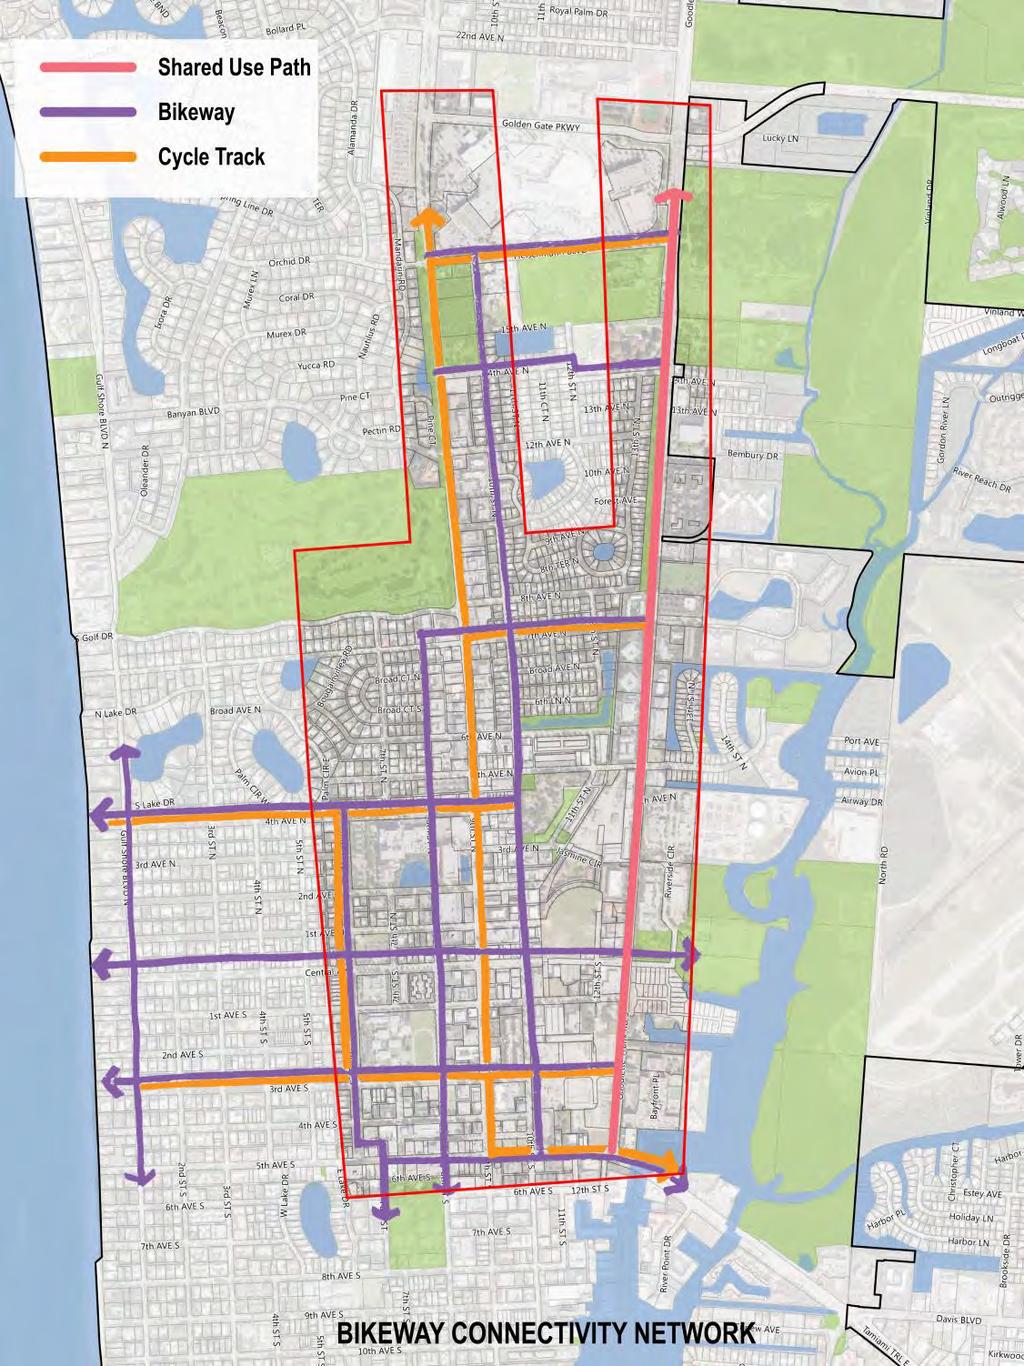 Bikeway Connectivity Network Opportunities to enhance existing and planned bikeway